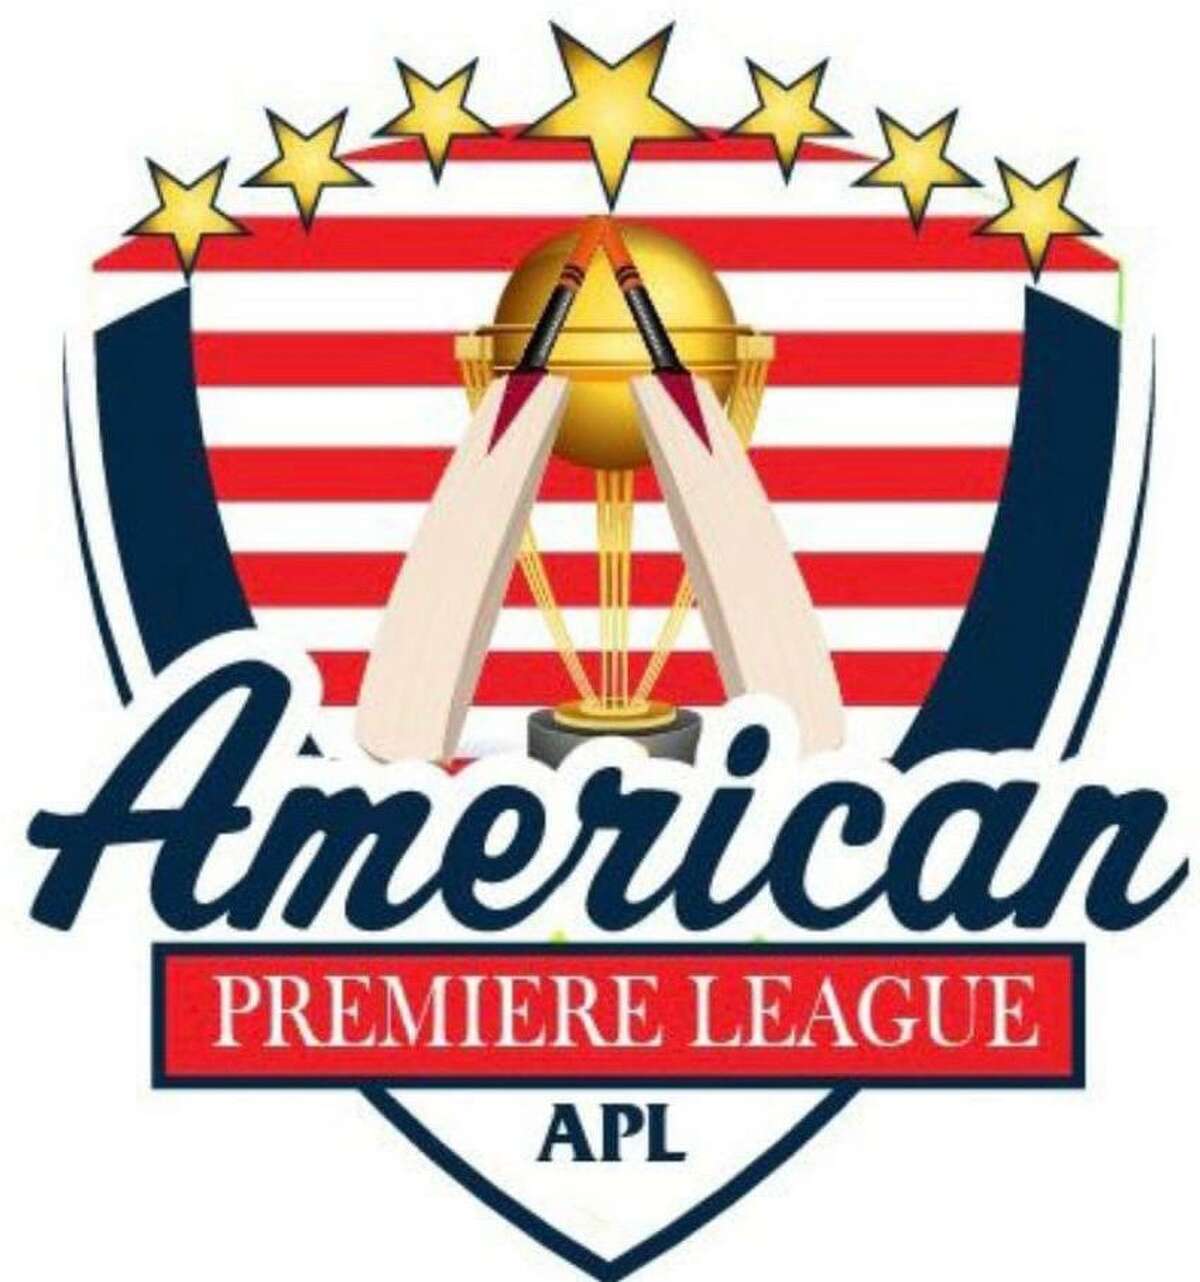 The logo for the American Premiere League